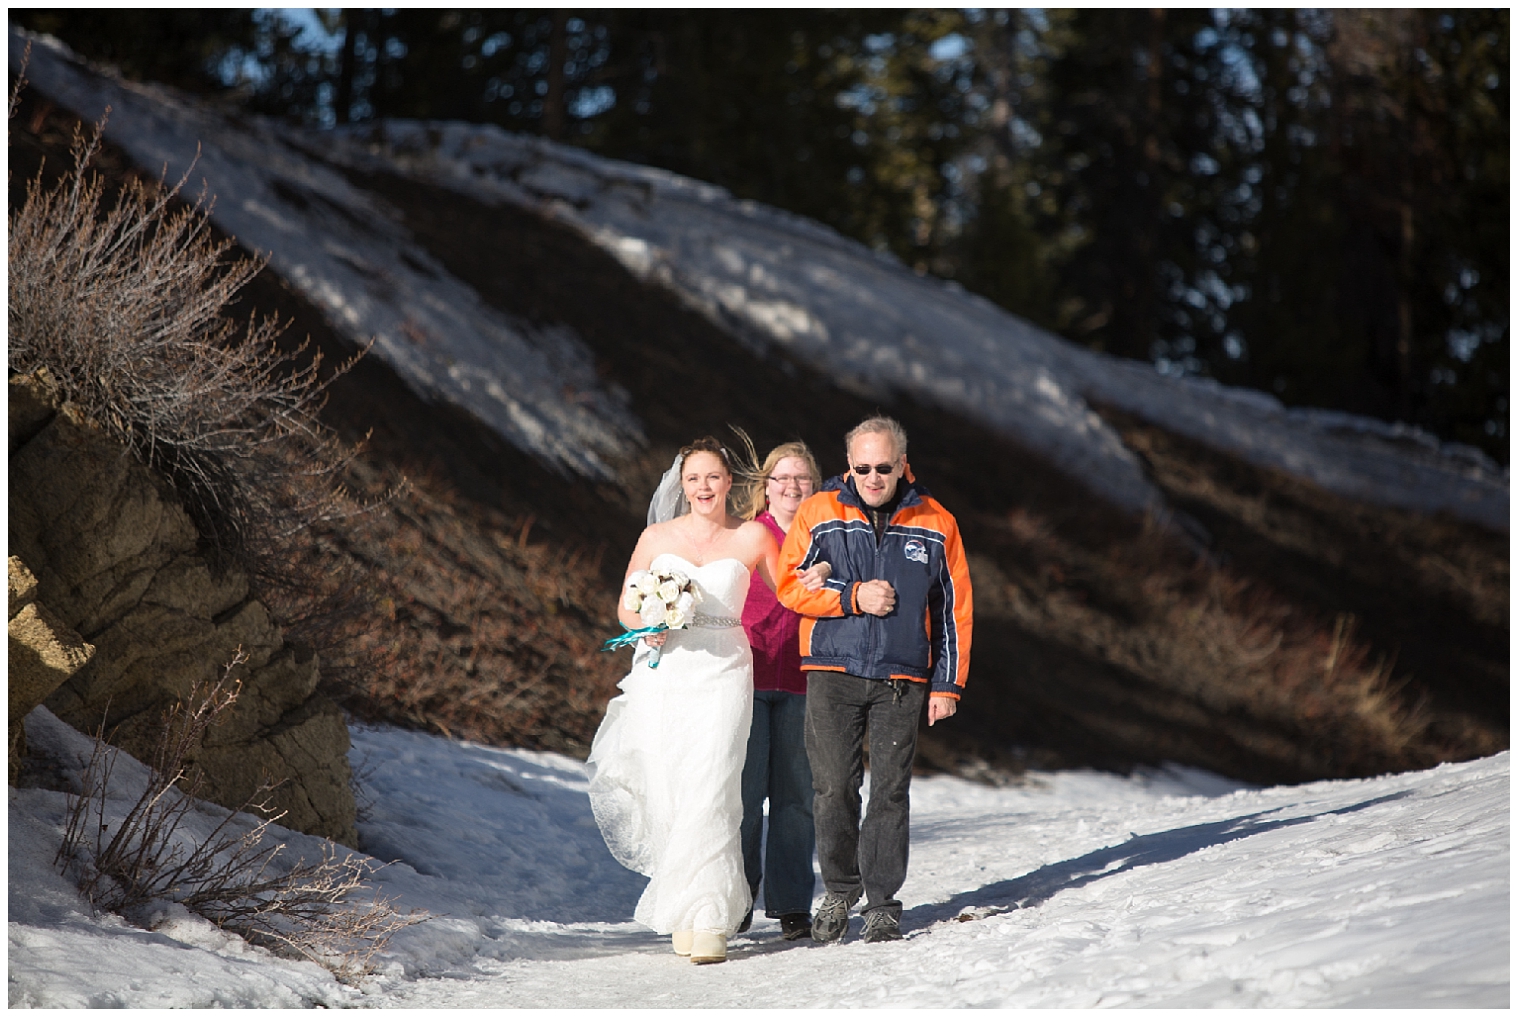 Bride is walked towards her groom by her father at her Breckenridge Colorado mountain elopement.